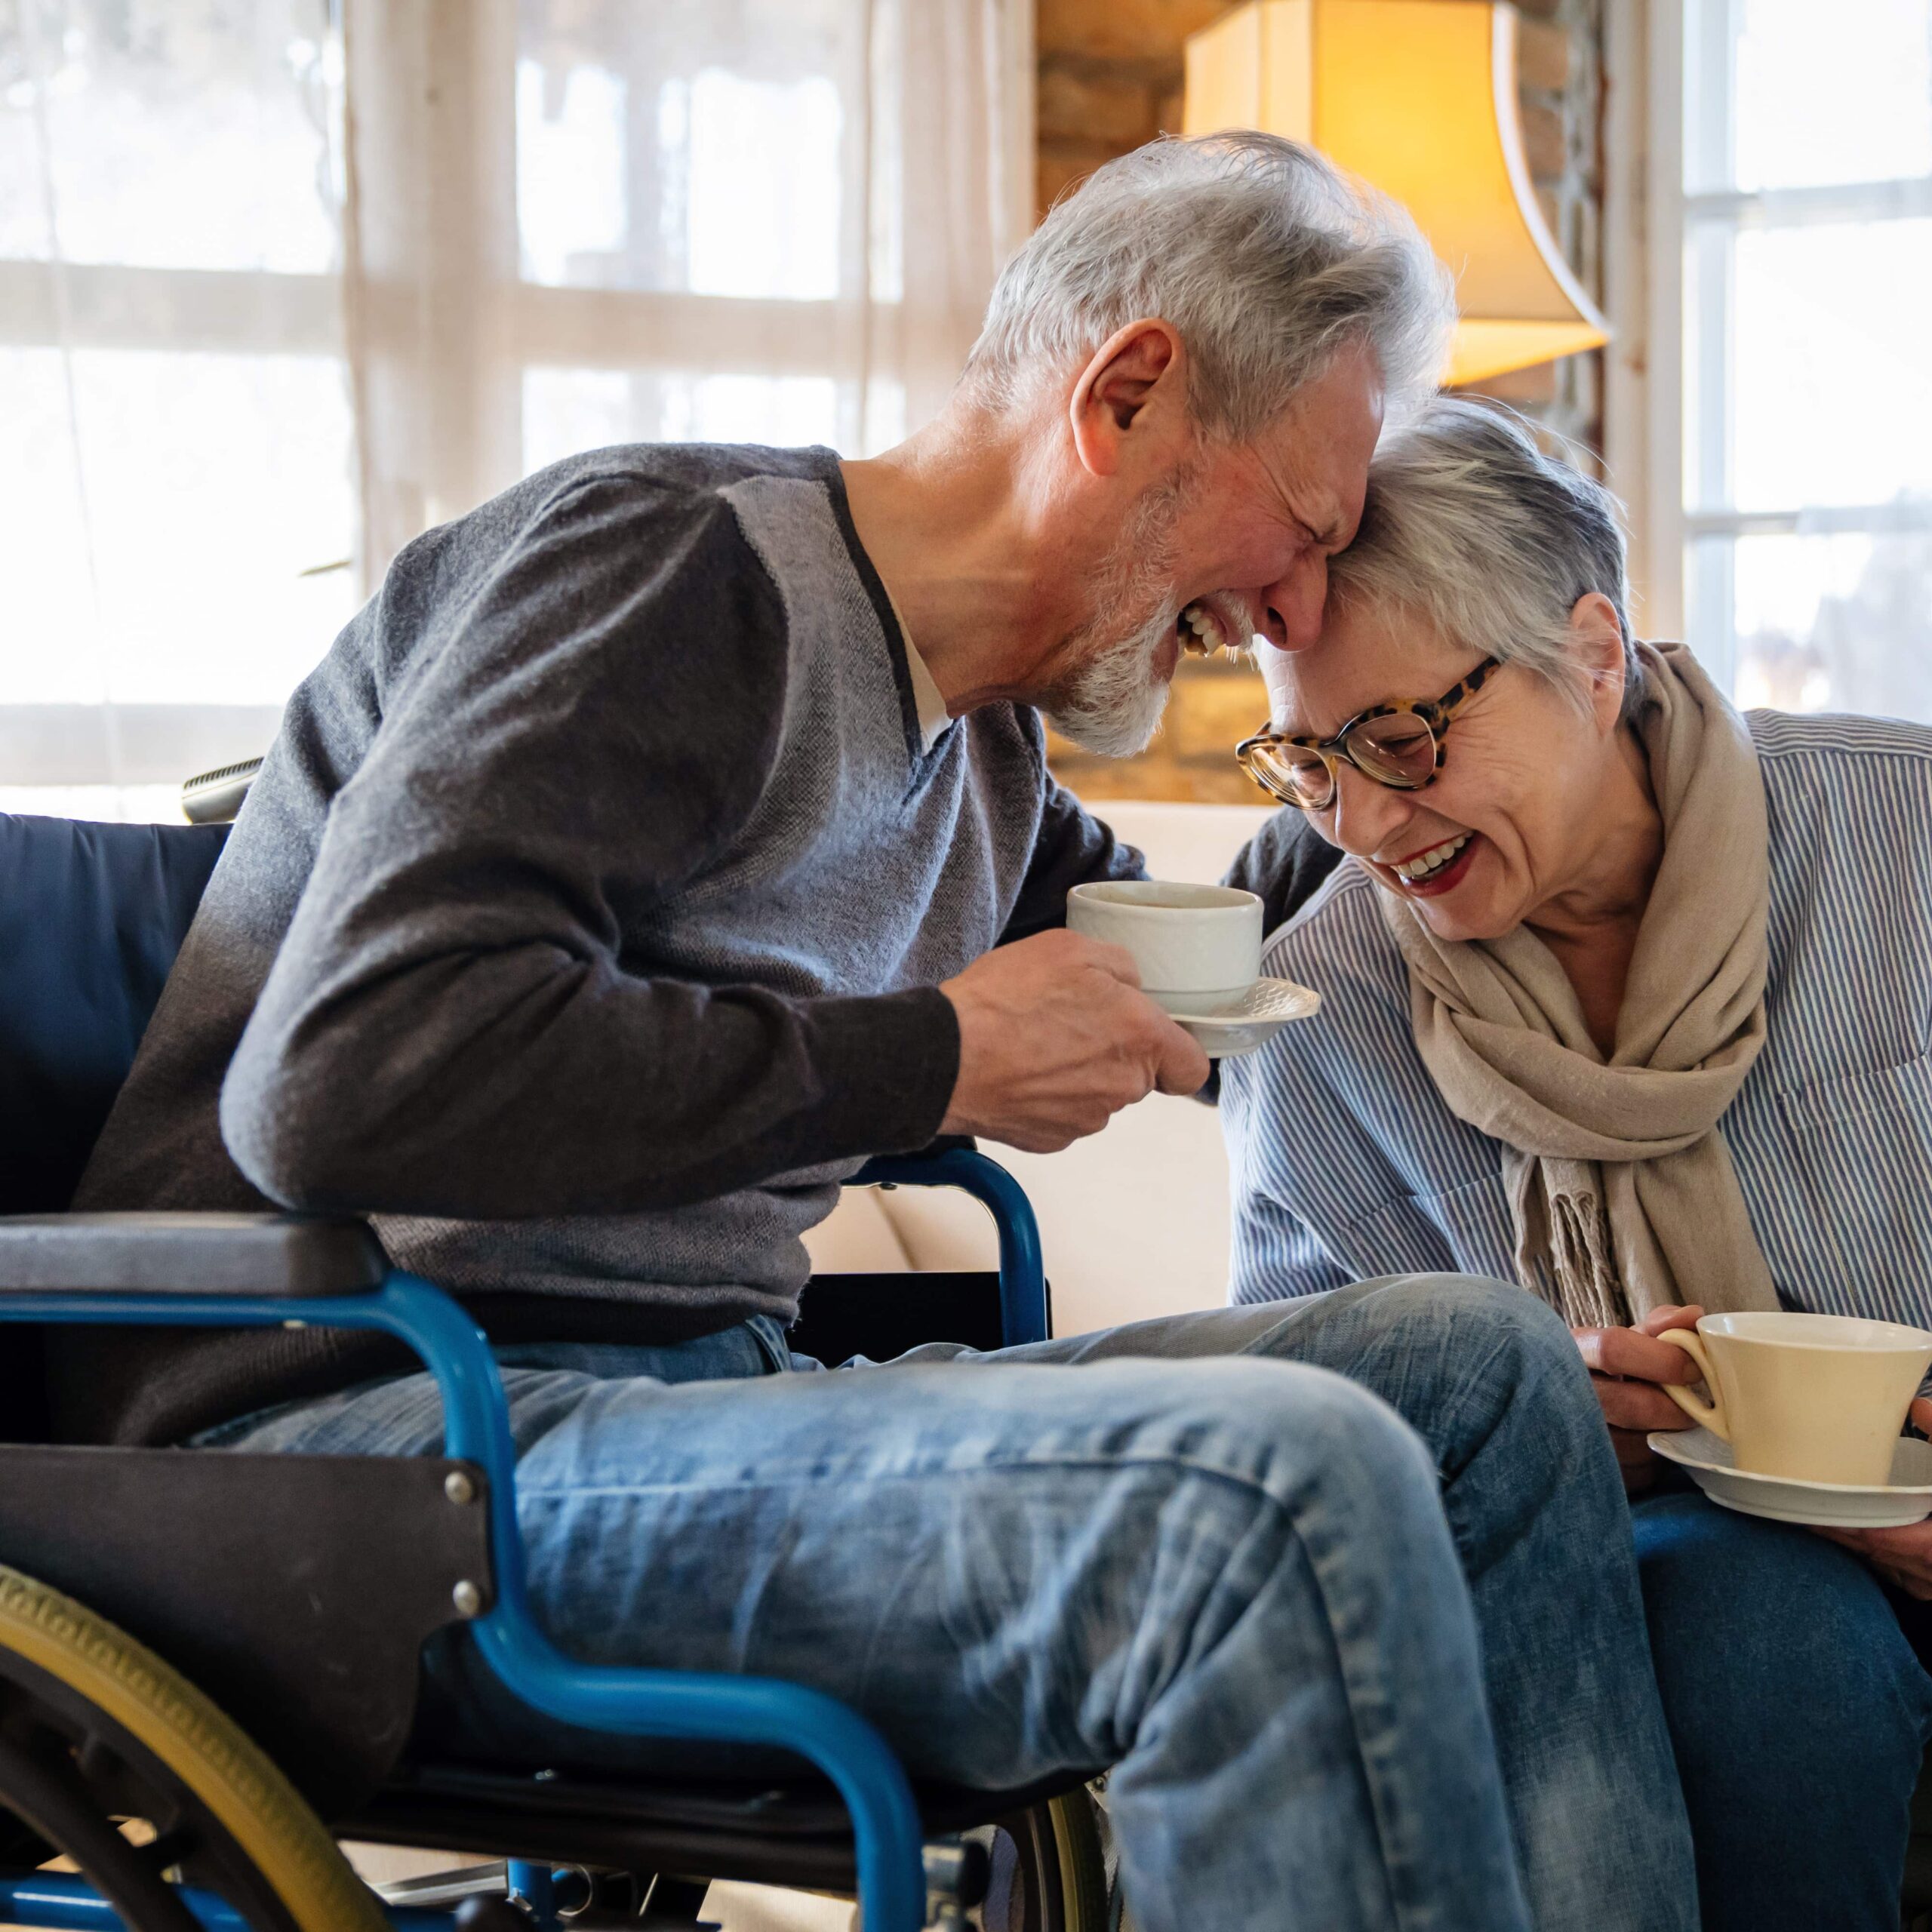 Man in wheelchair with his wife laughing